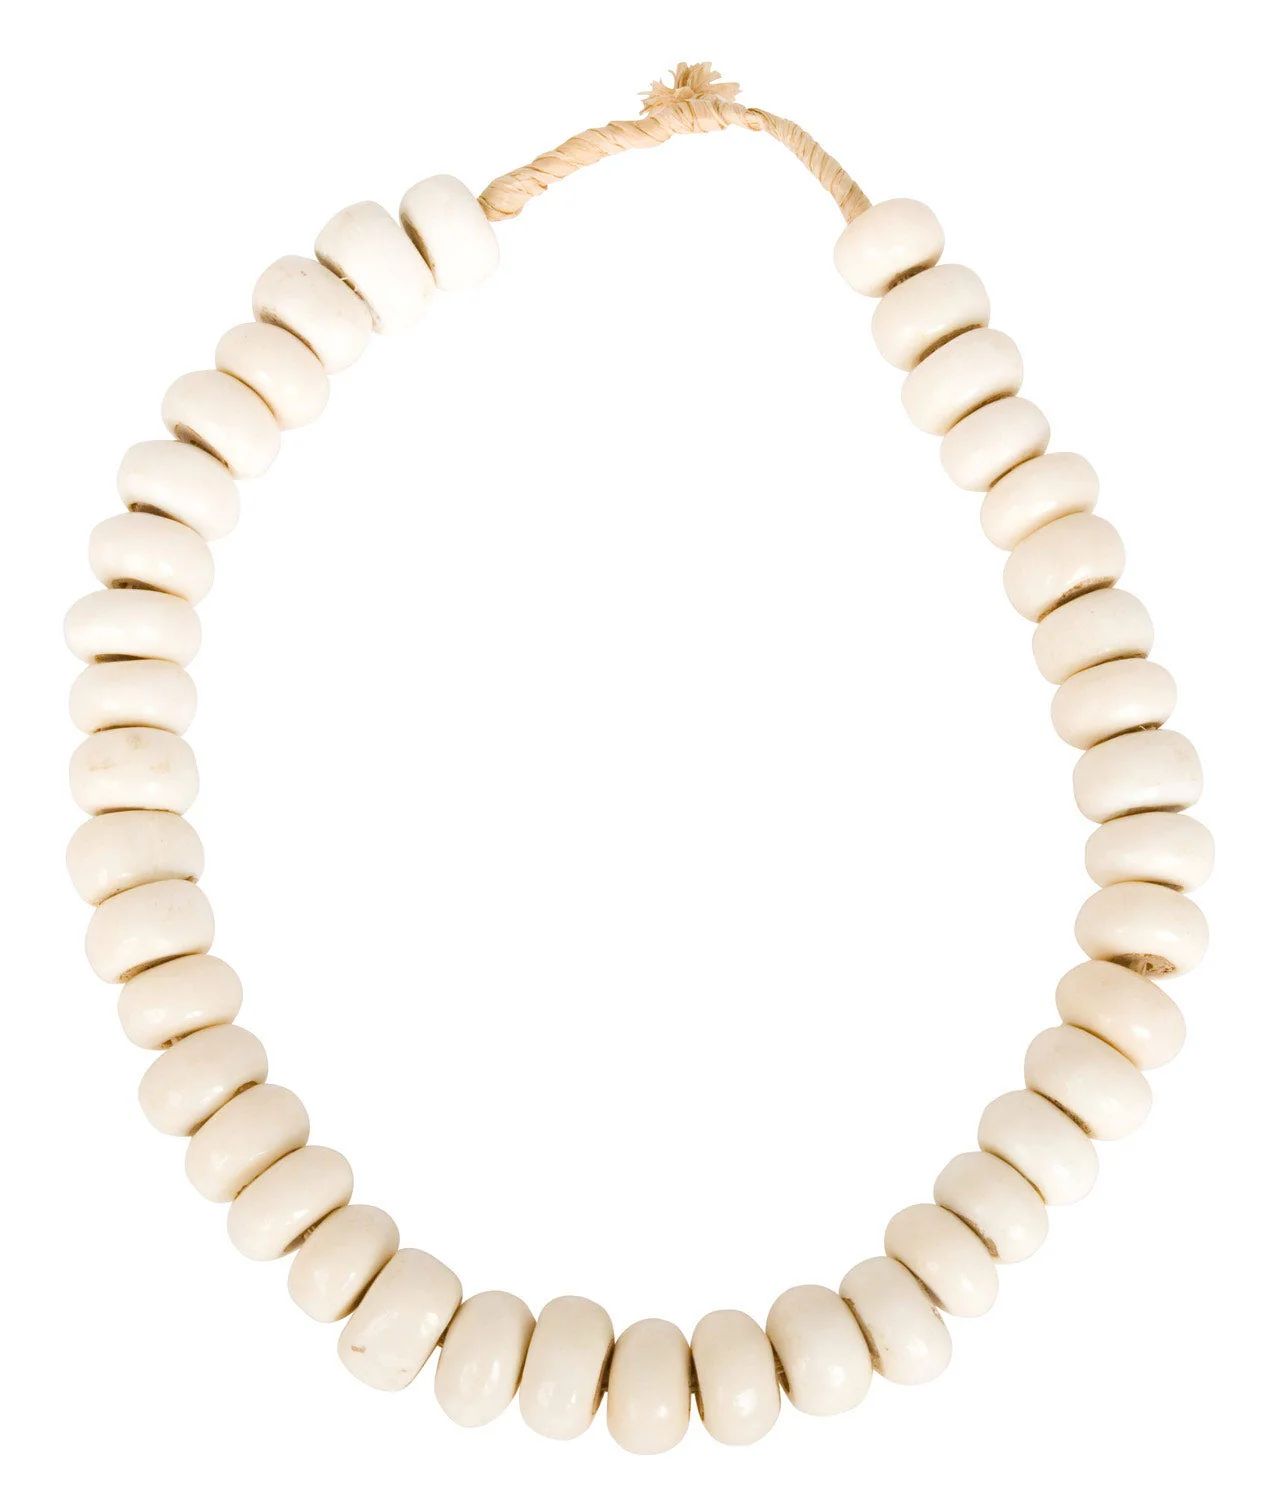 African White Bead Necklace | Jayson Home